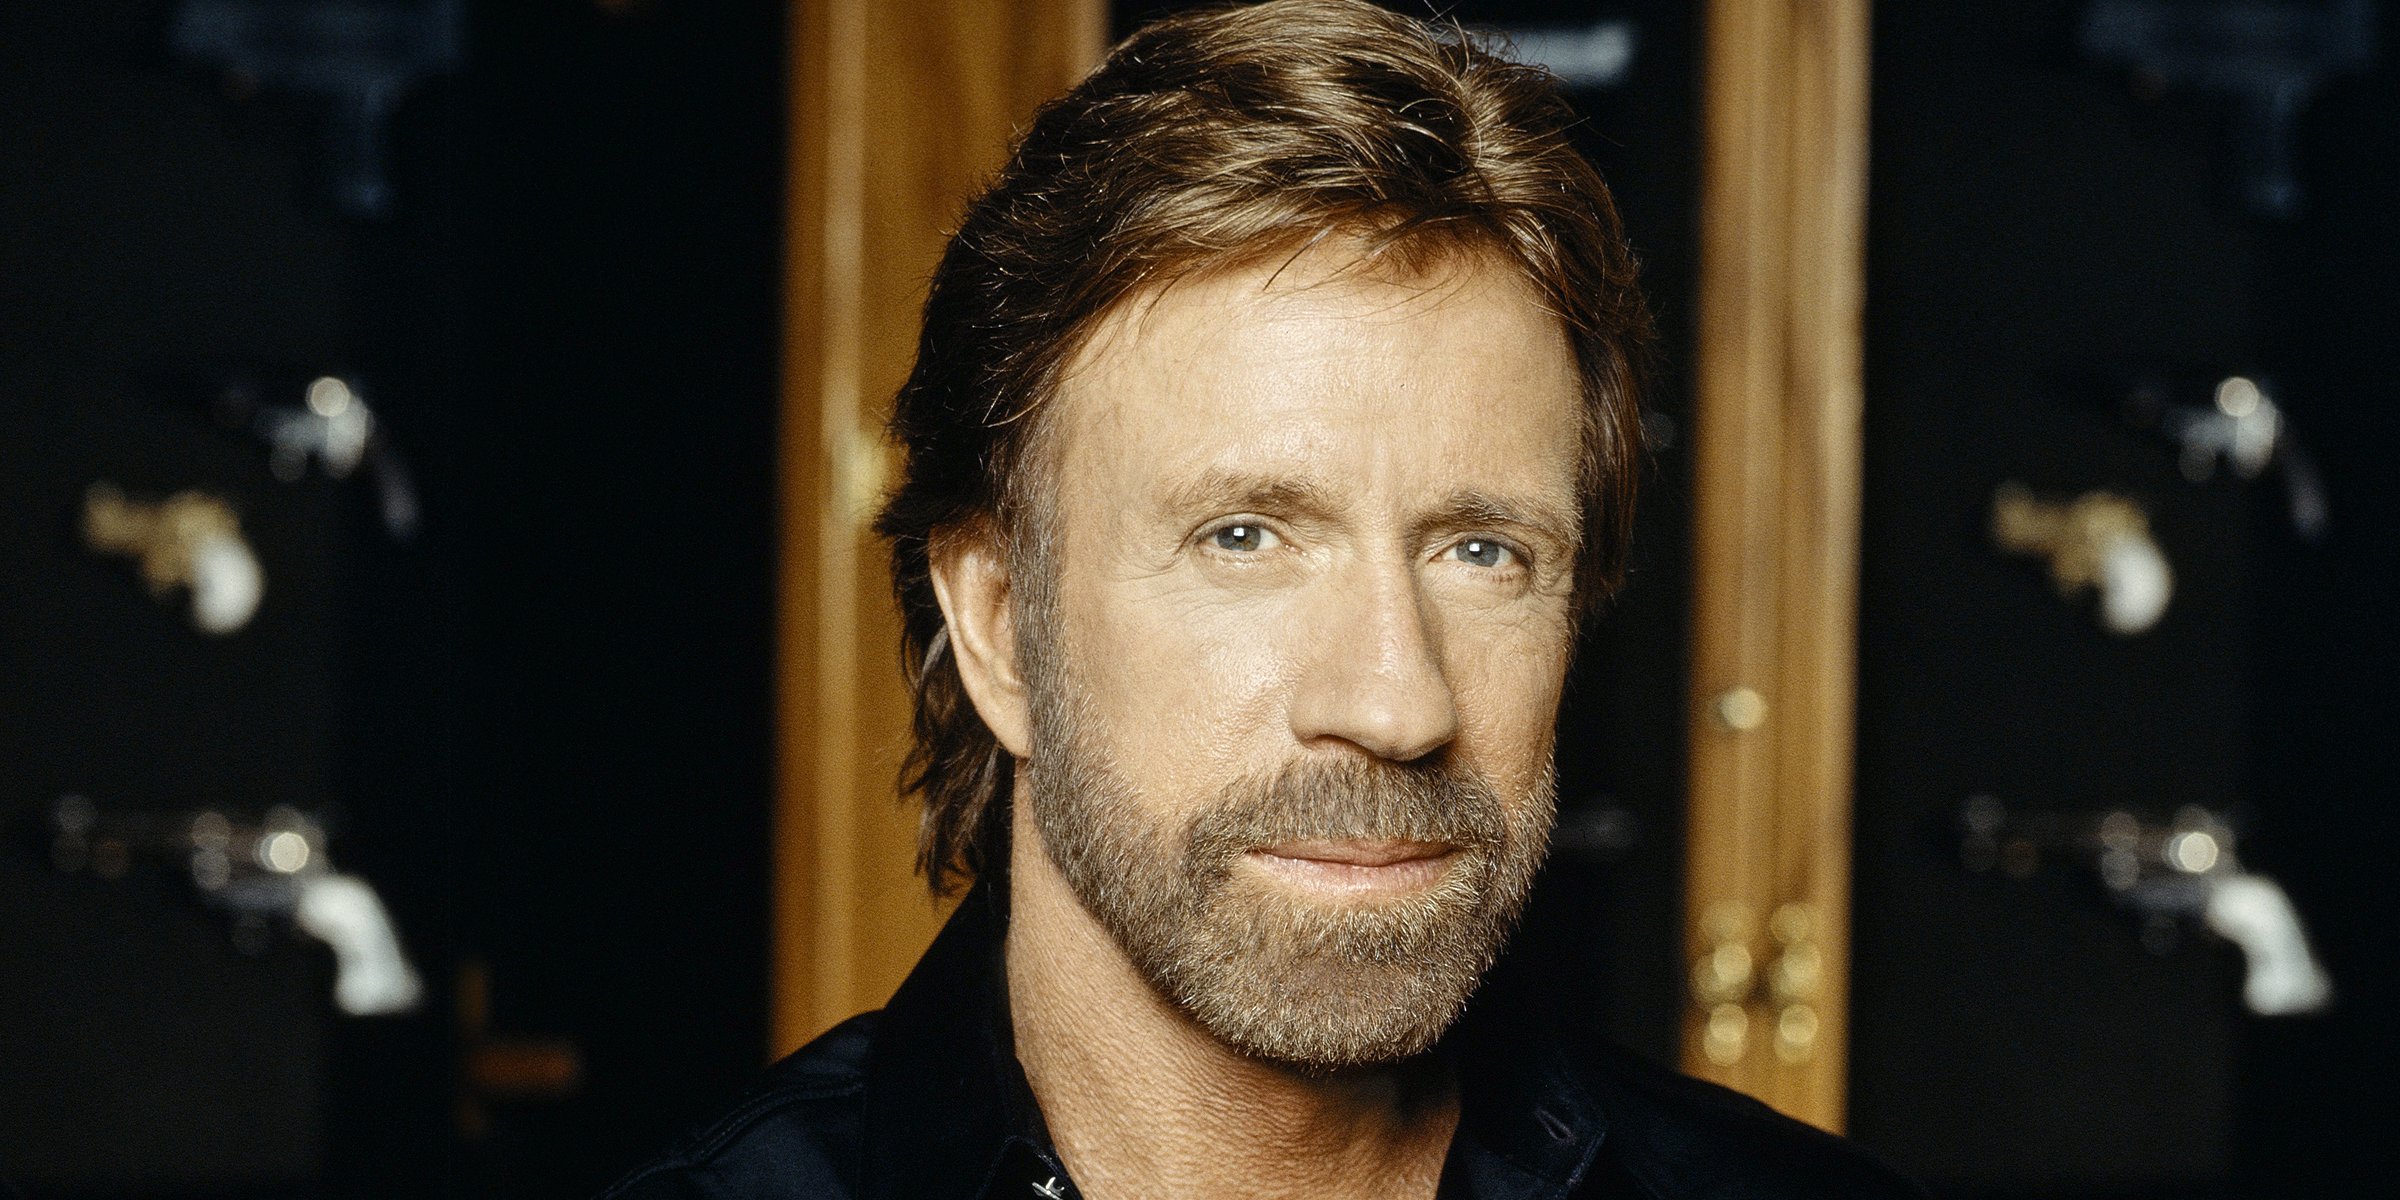 Chuck Norris┃Source: Getty Images